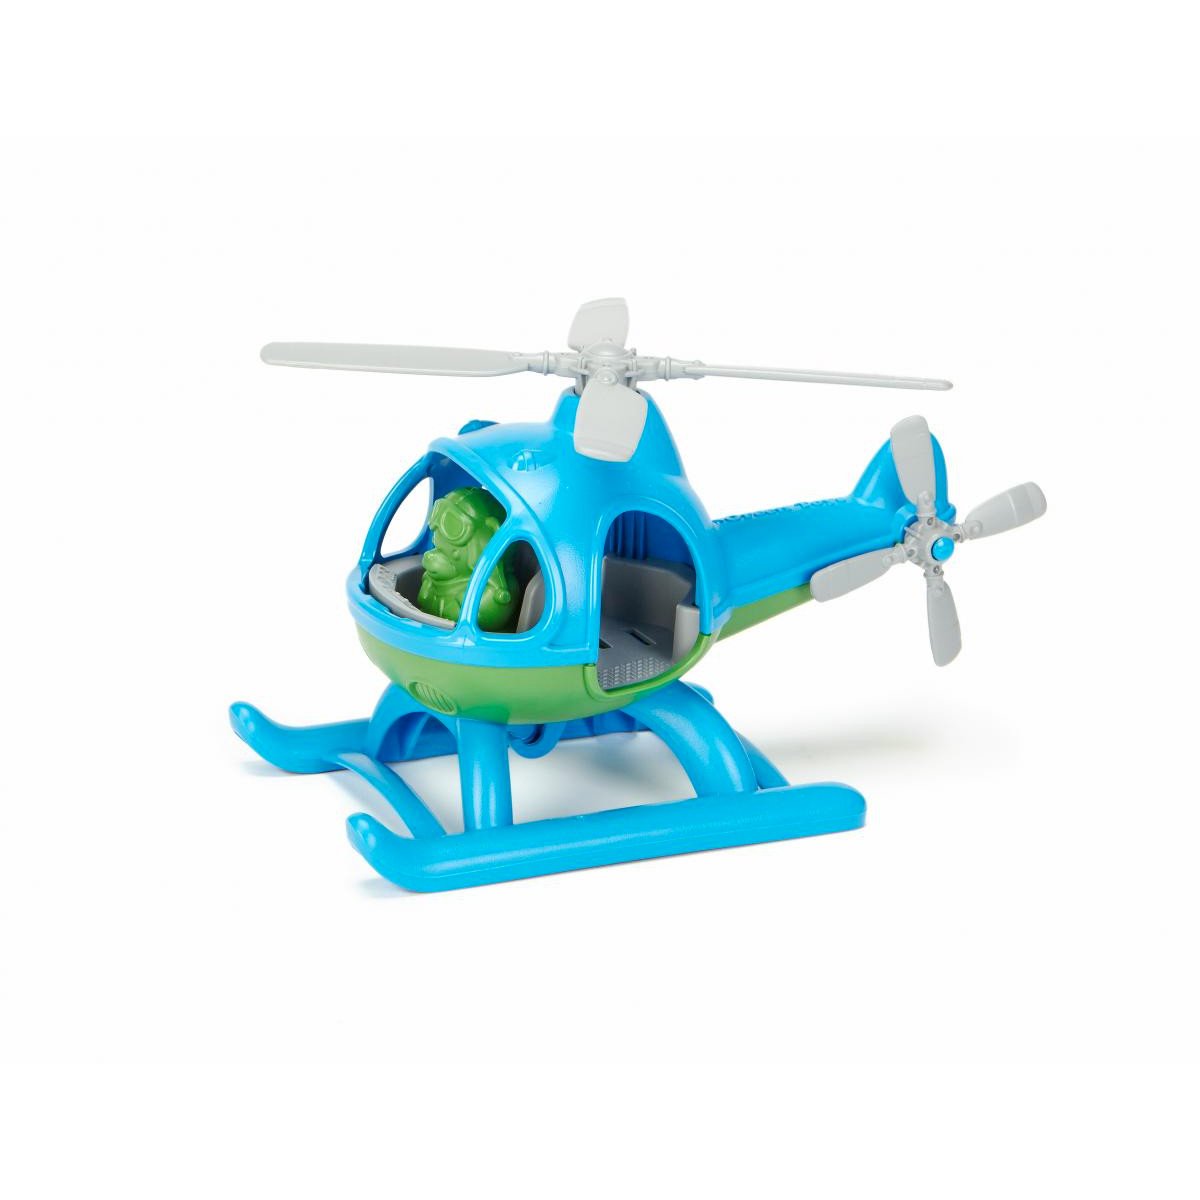 plastic toy helicopter